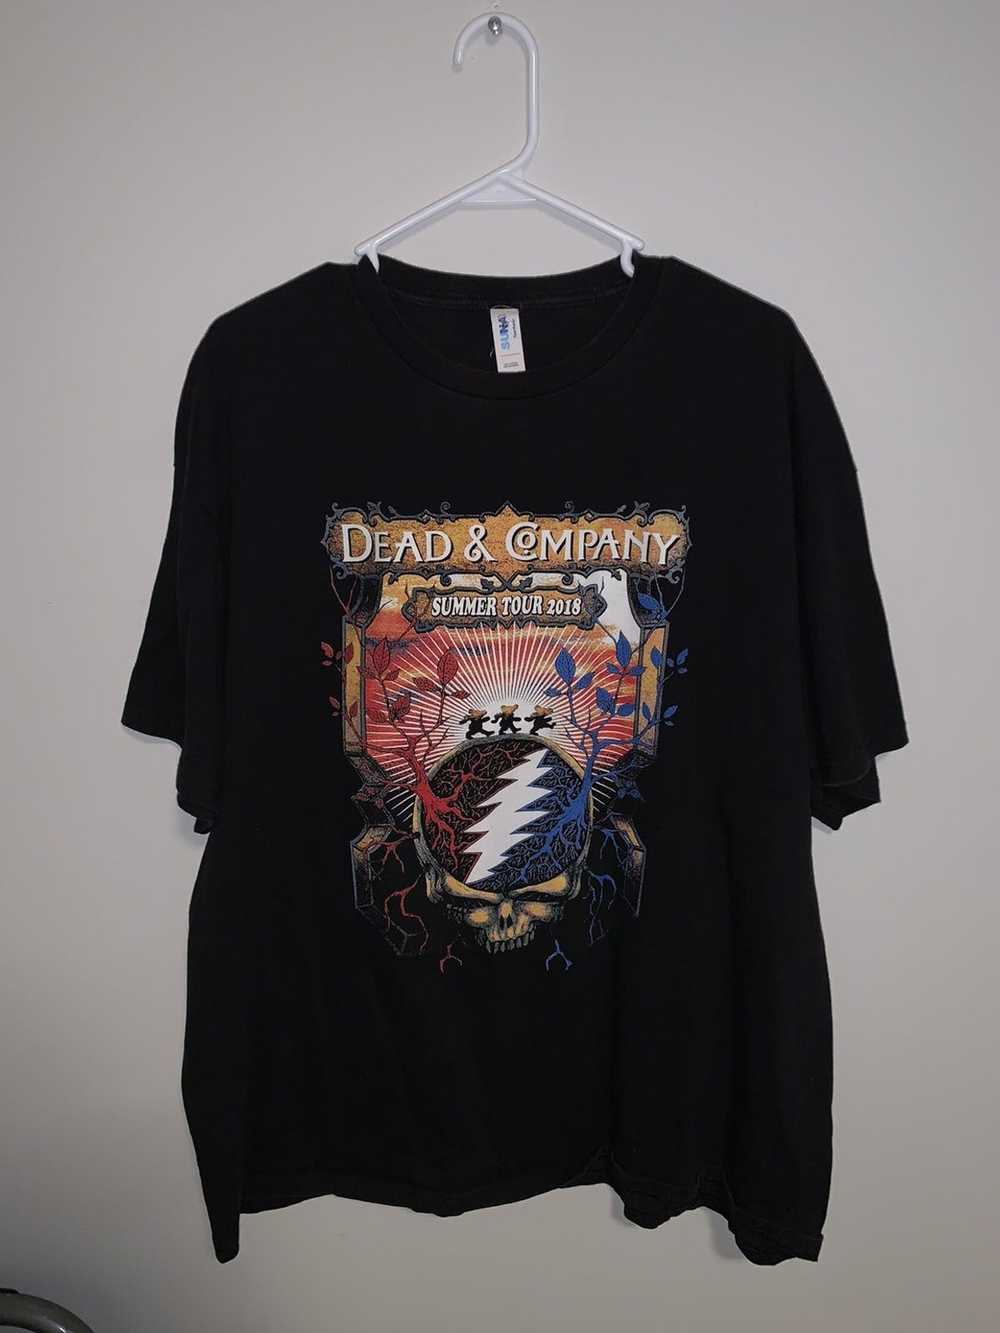 Band Tees × Grateful Dead Greatful dead tour tee - image 1